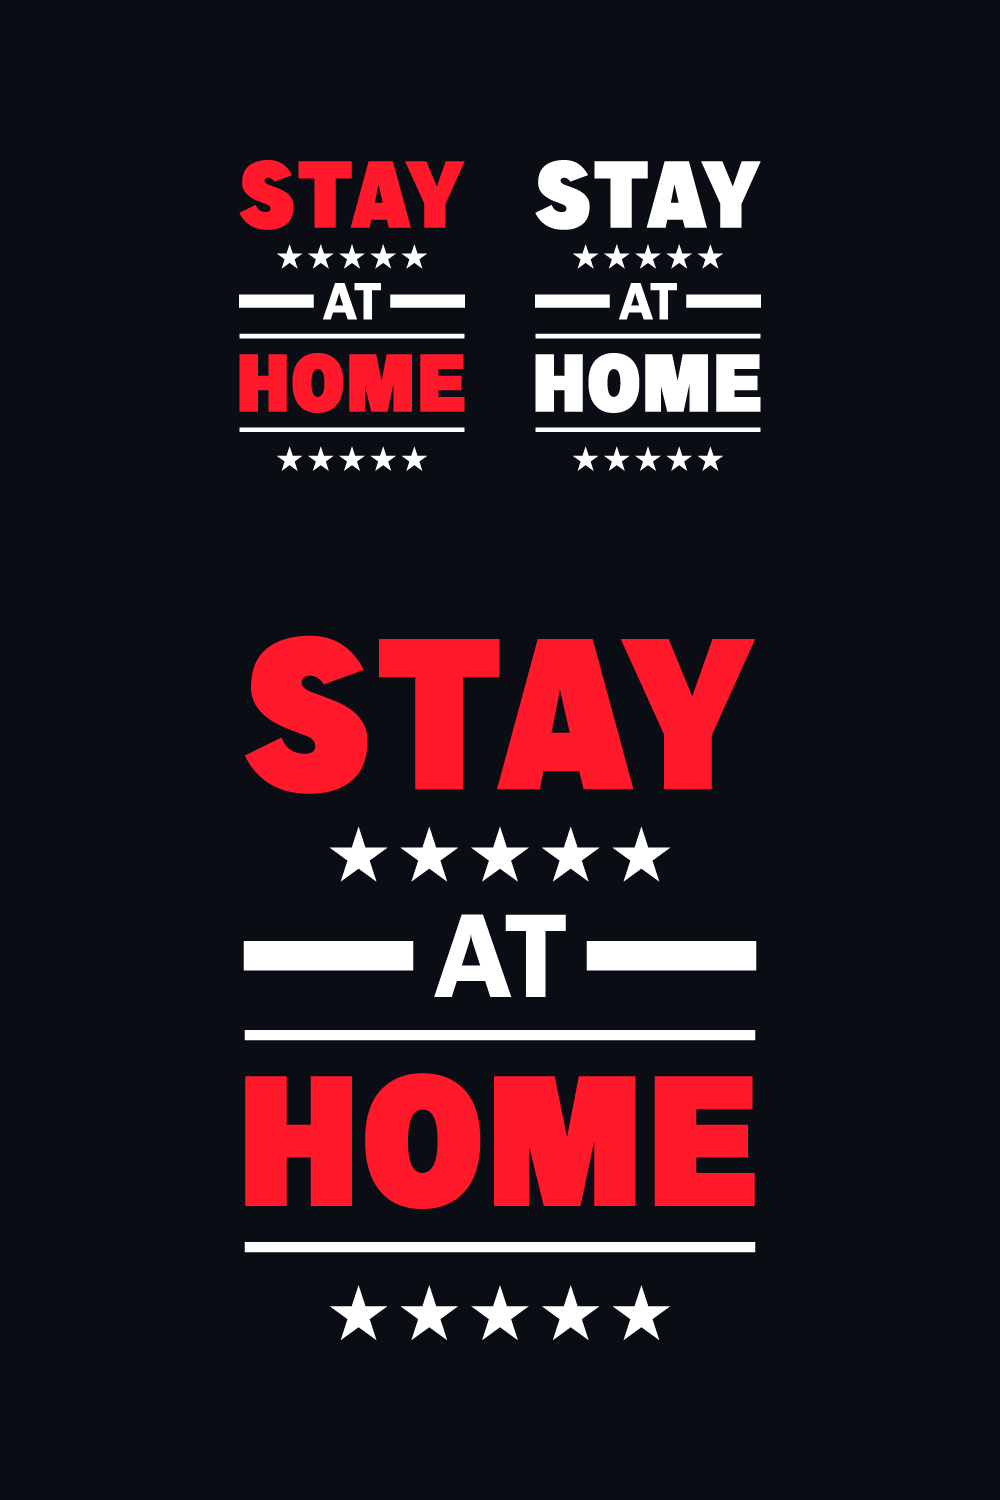 Stay at Home T-Shirt Design pinterest image.